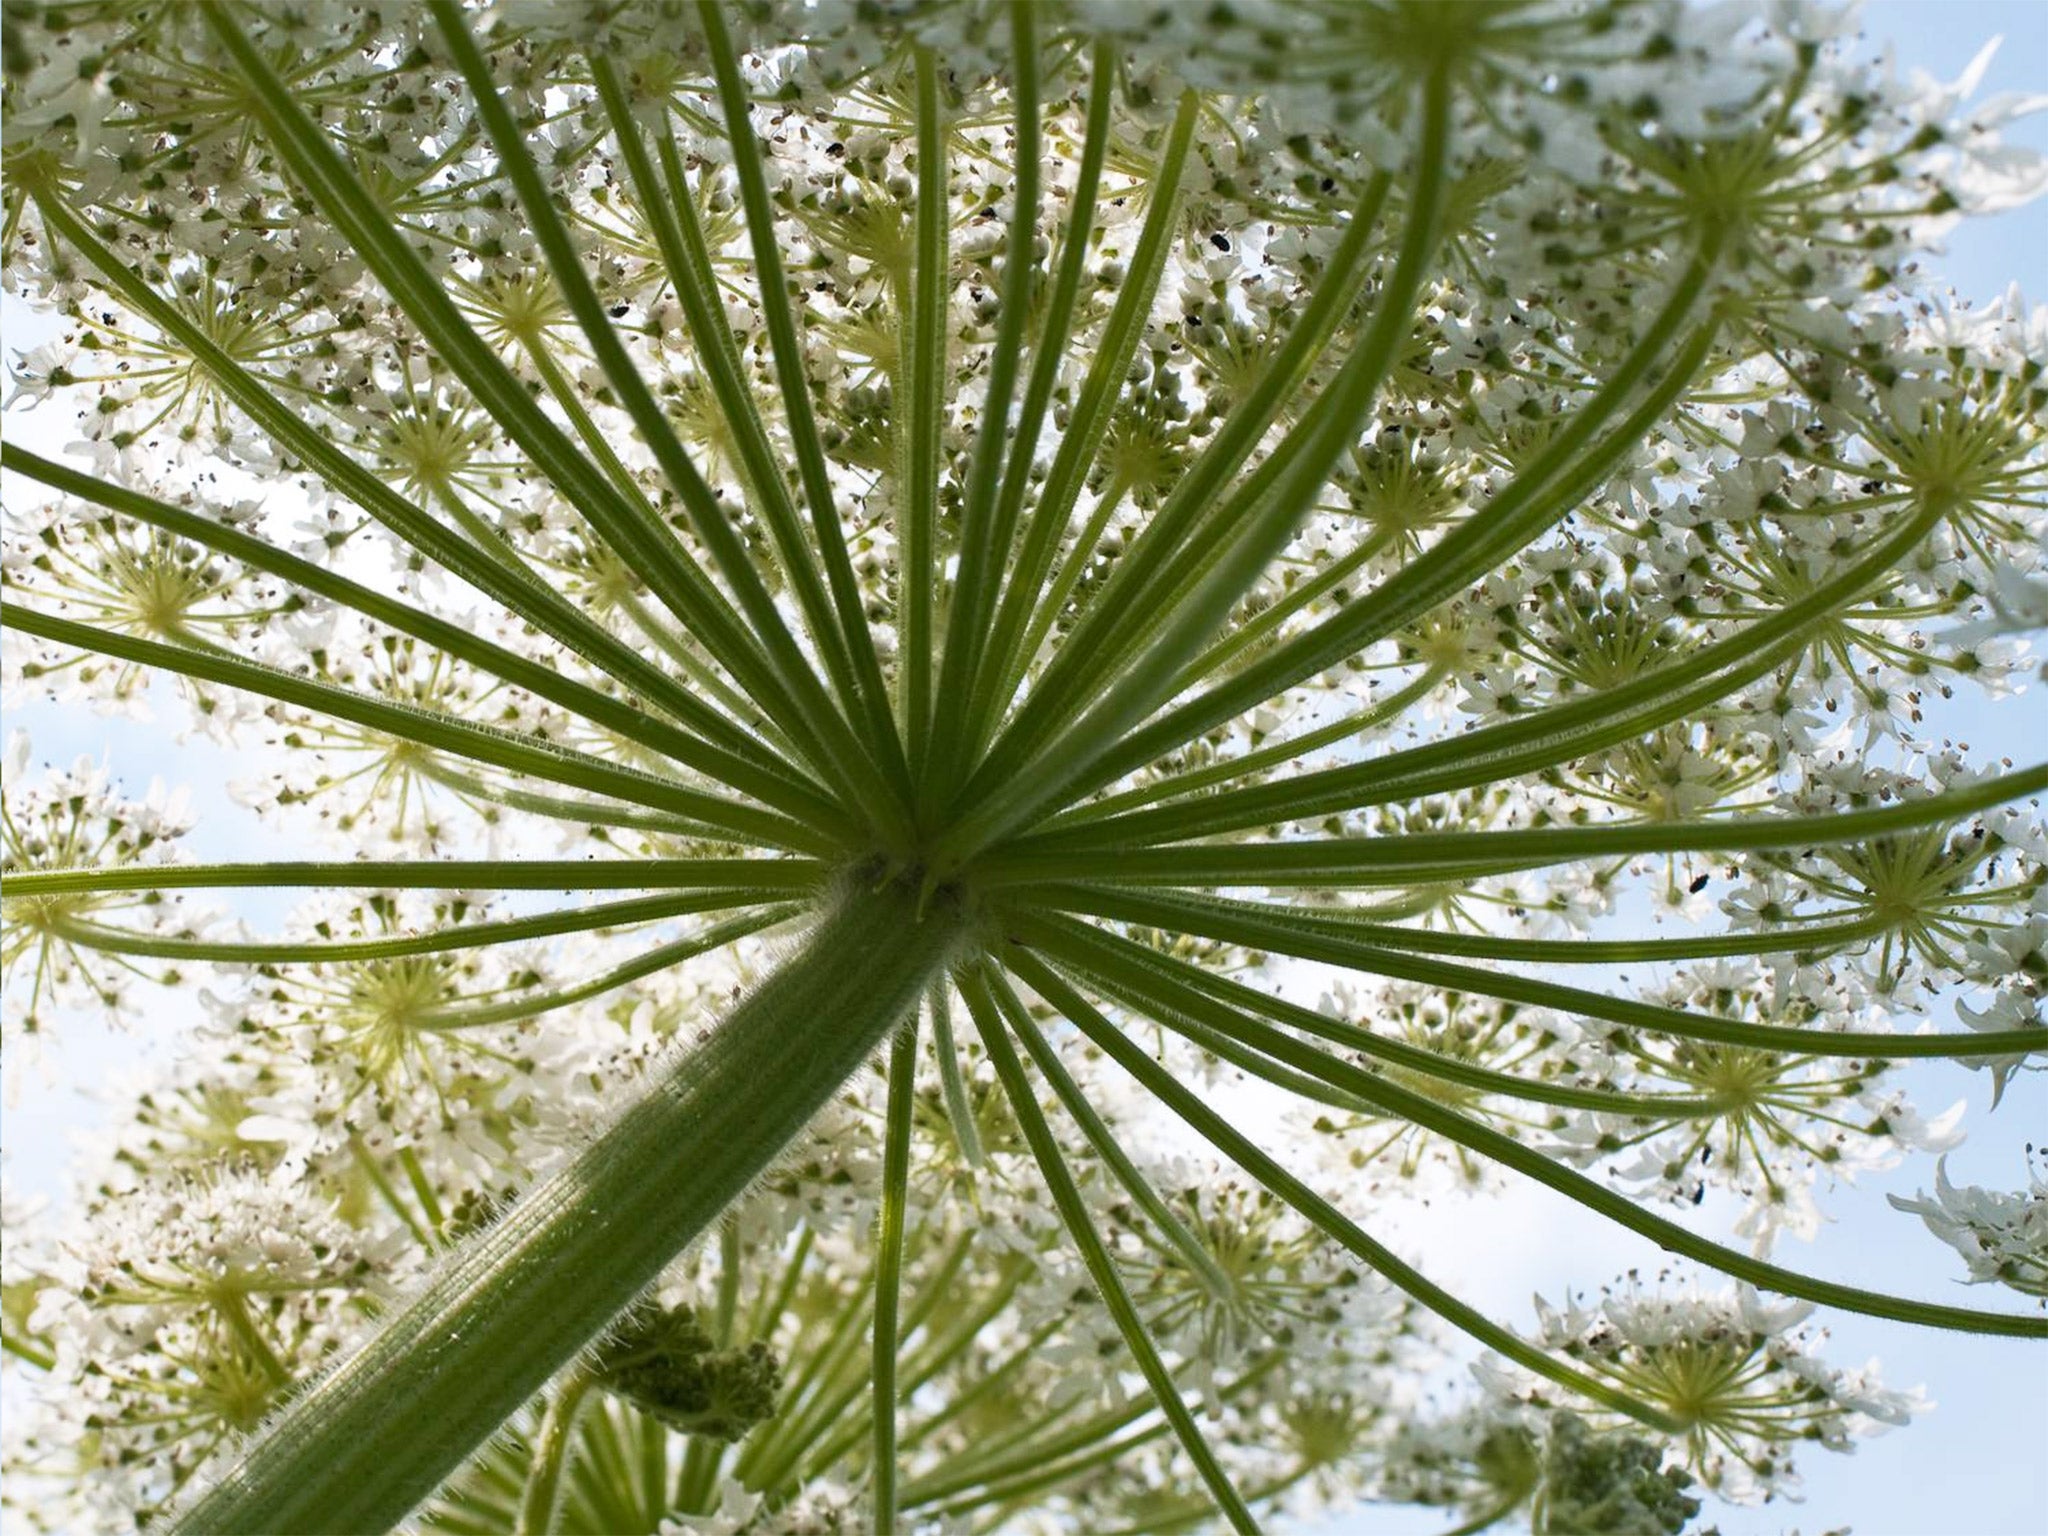 This non-native giant hogweed, or cow parsnip, is one of the many species that has thrived in Britain